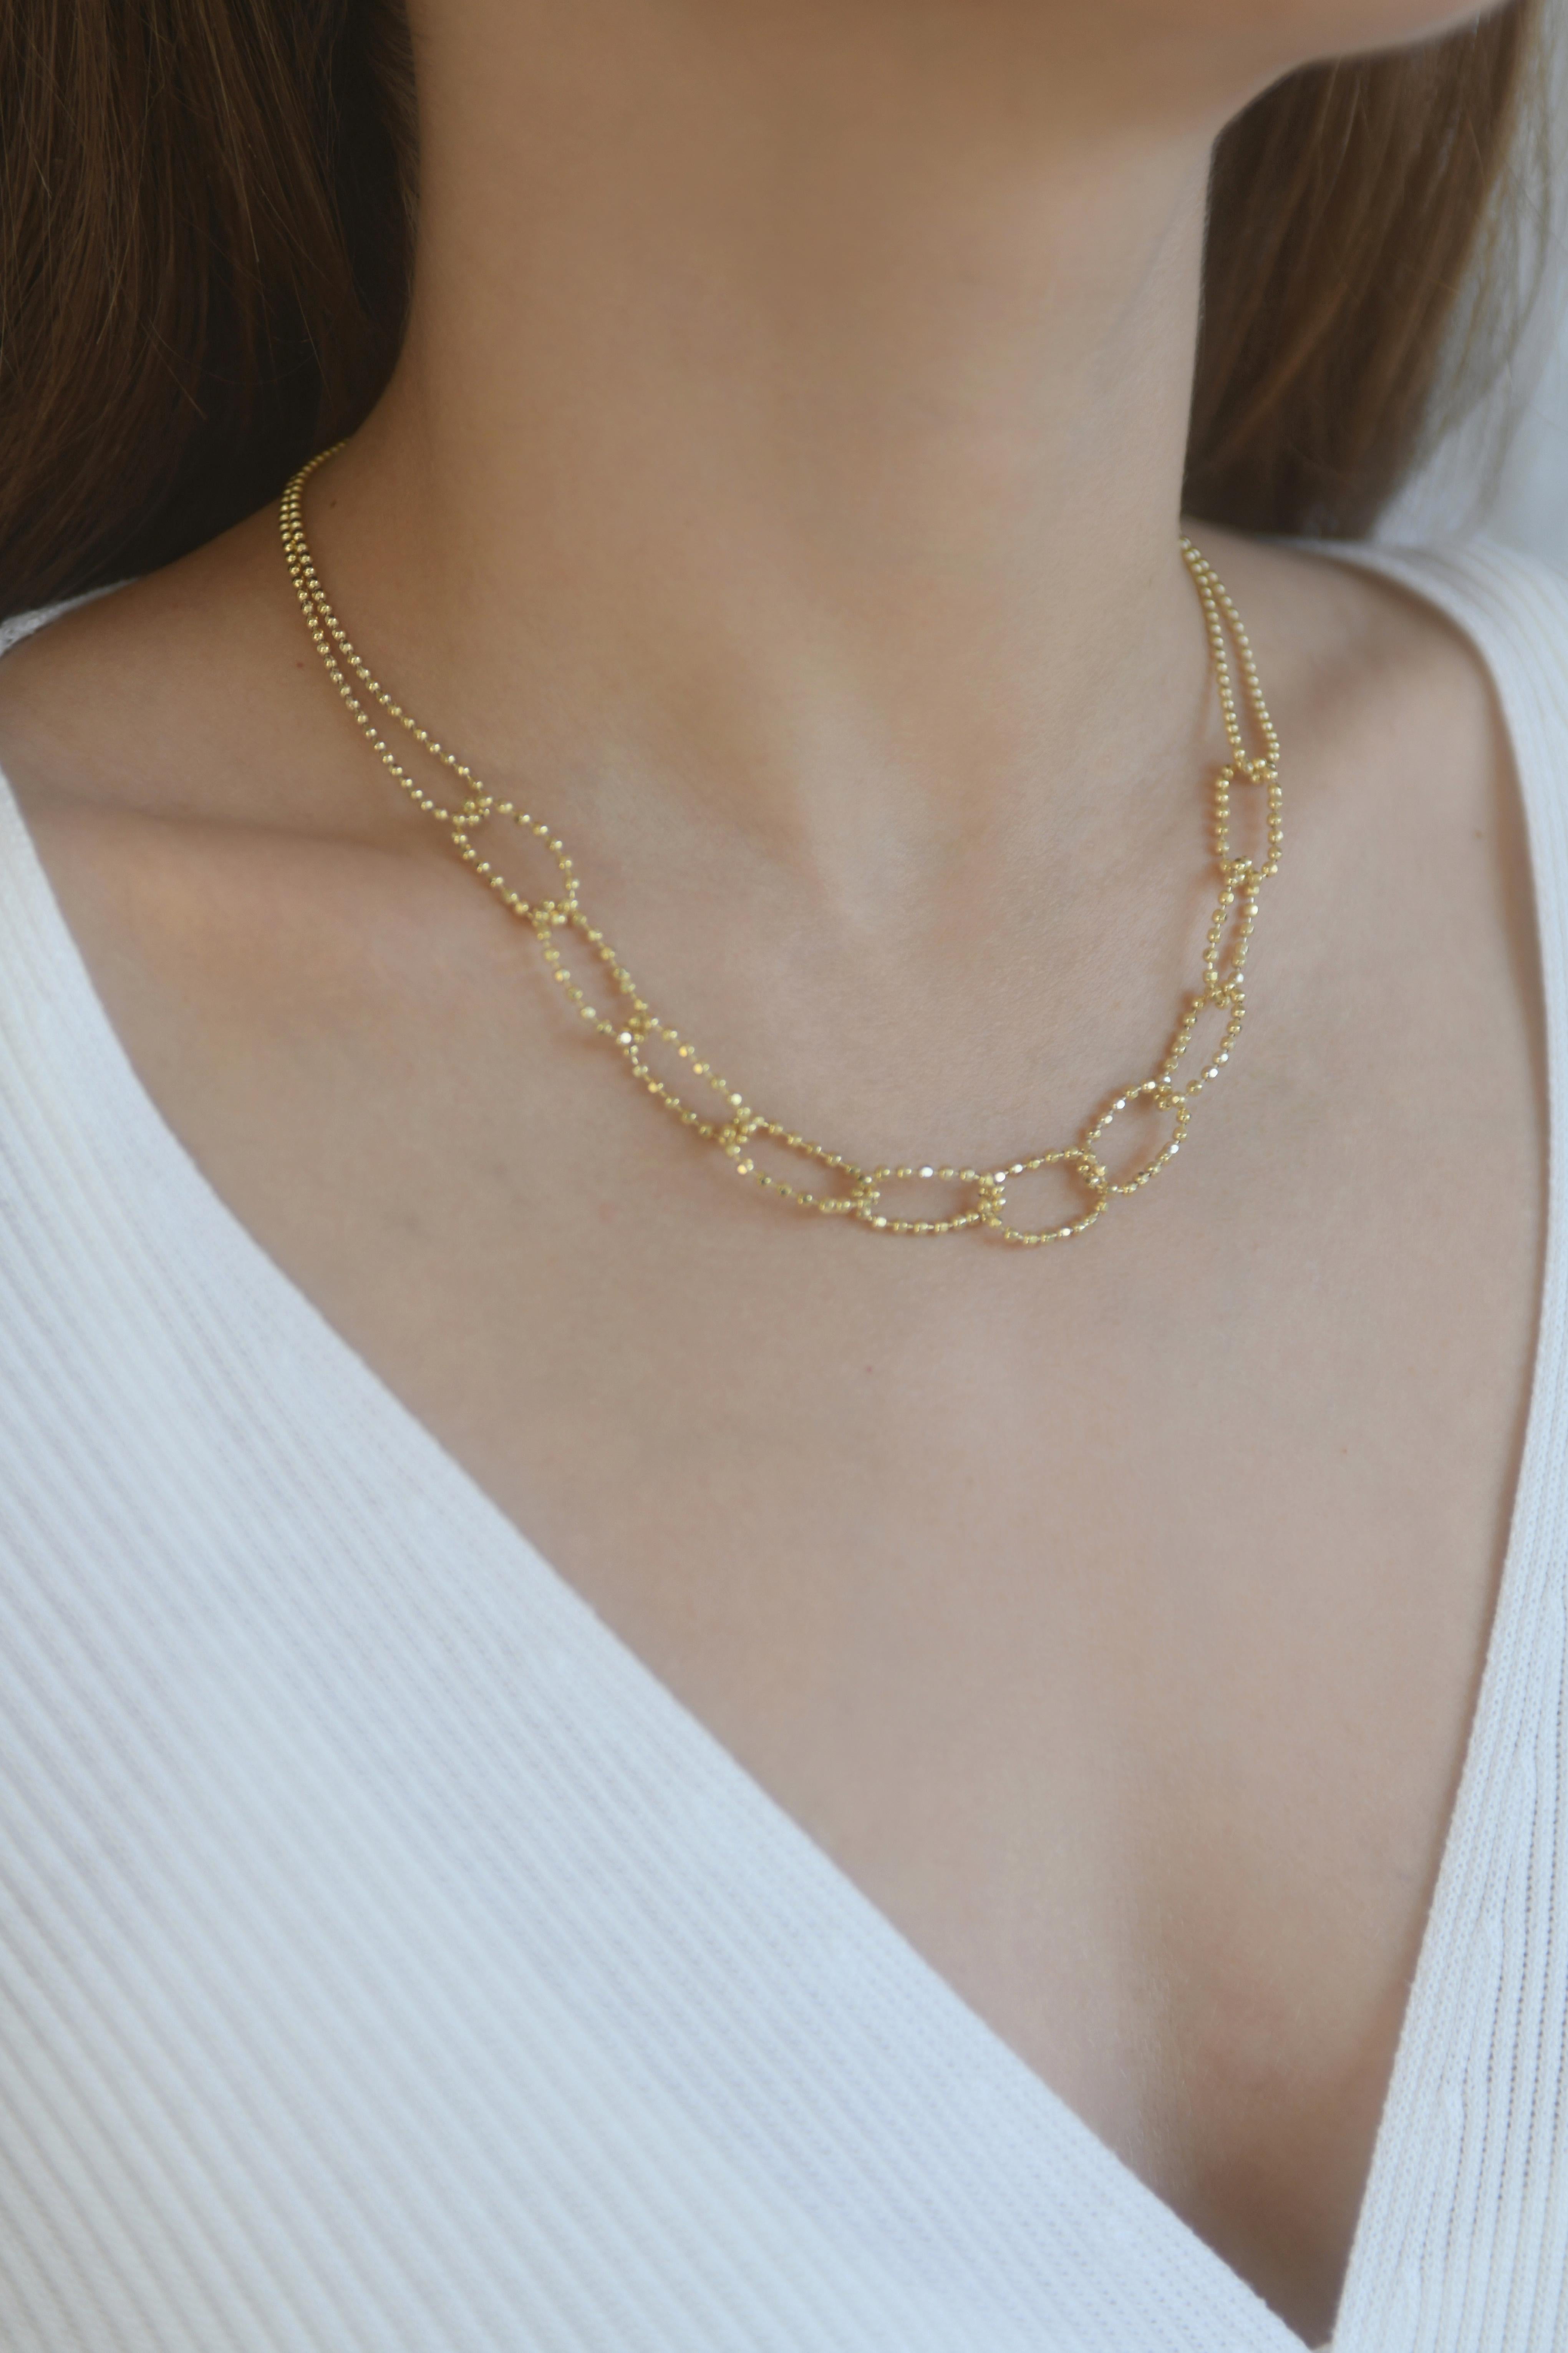 Women's Necklace Chain Beaded Ball Classic 18K Gold Plated Sterling Silver Greek Jewelry For Sale